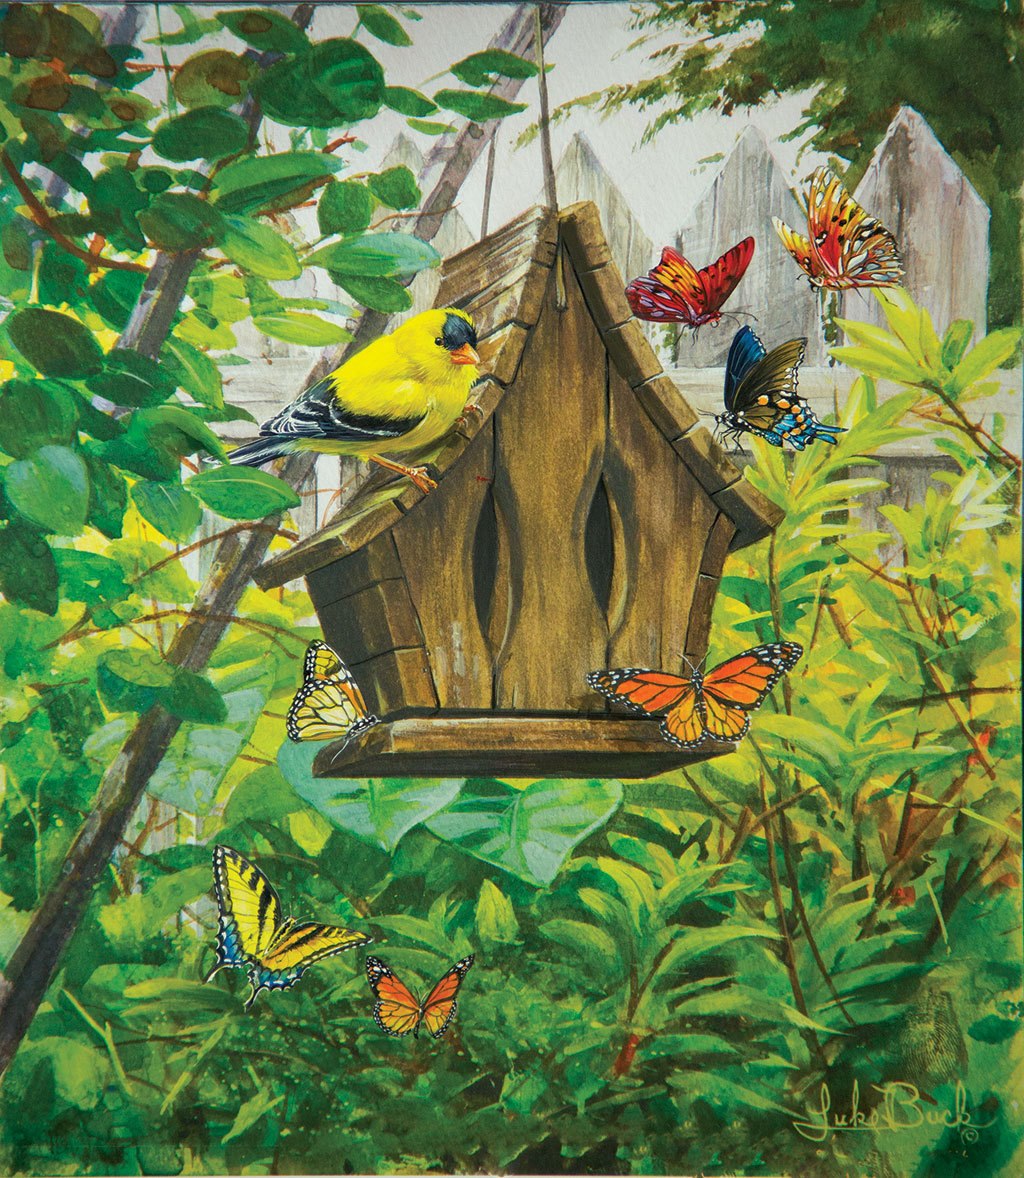 The Butterfly House - 1000pc Jigsaw Puzzle by Sunsout